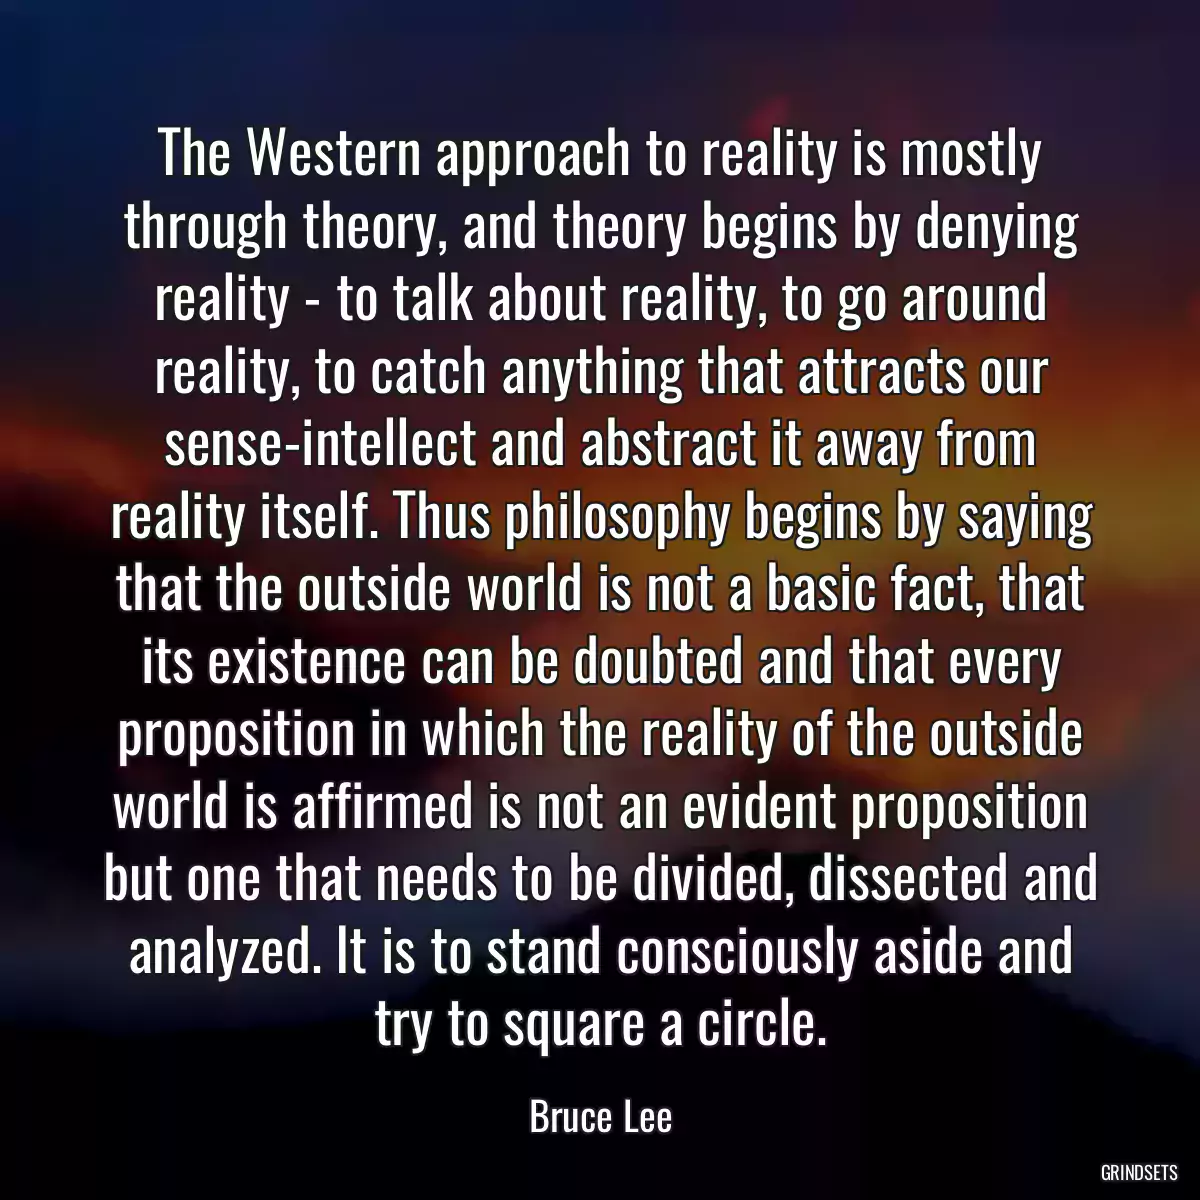 The Western approach to reality is mostly through theory, and theory begins by denying reality - to talk about reality, to go around reality, to catch anything that attracts our sense-intellect and abstract it away from reality itself. Thus philosophy begins by saying that the outside world is not a basic fact, that its existence can be doubted and that every proposition in which the reality of the outside world is affirmed is not an evident proposition but one that needs to be divided, dissected and analyzed. It is to stand consciously aside and try to square a circle.